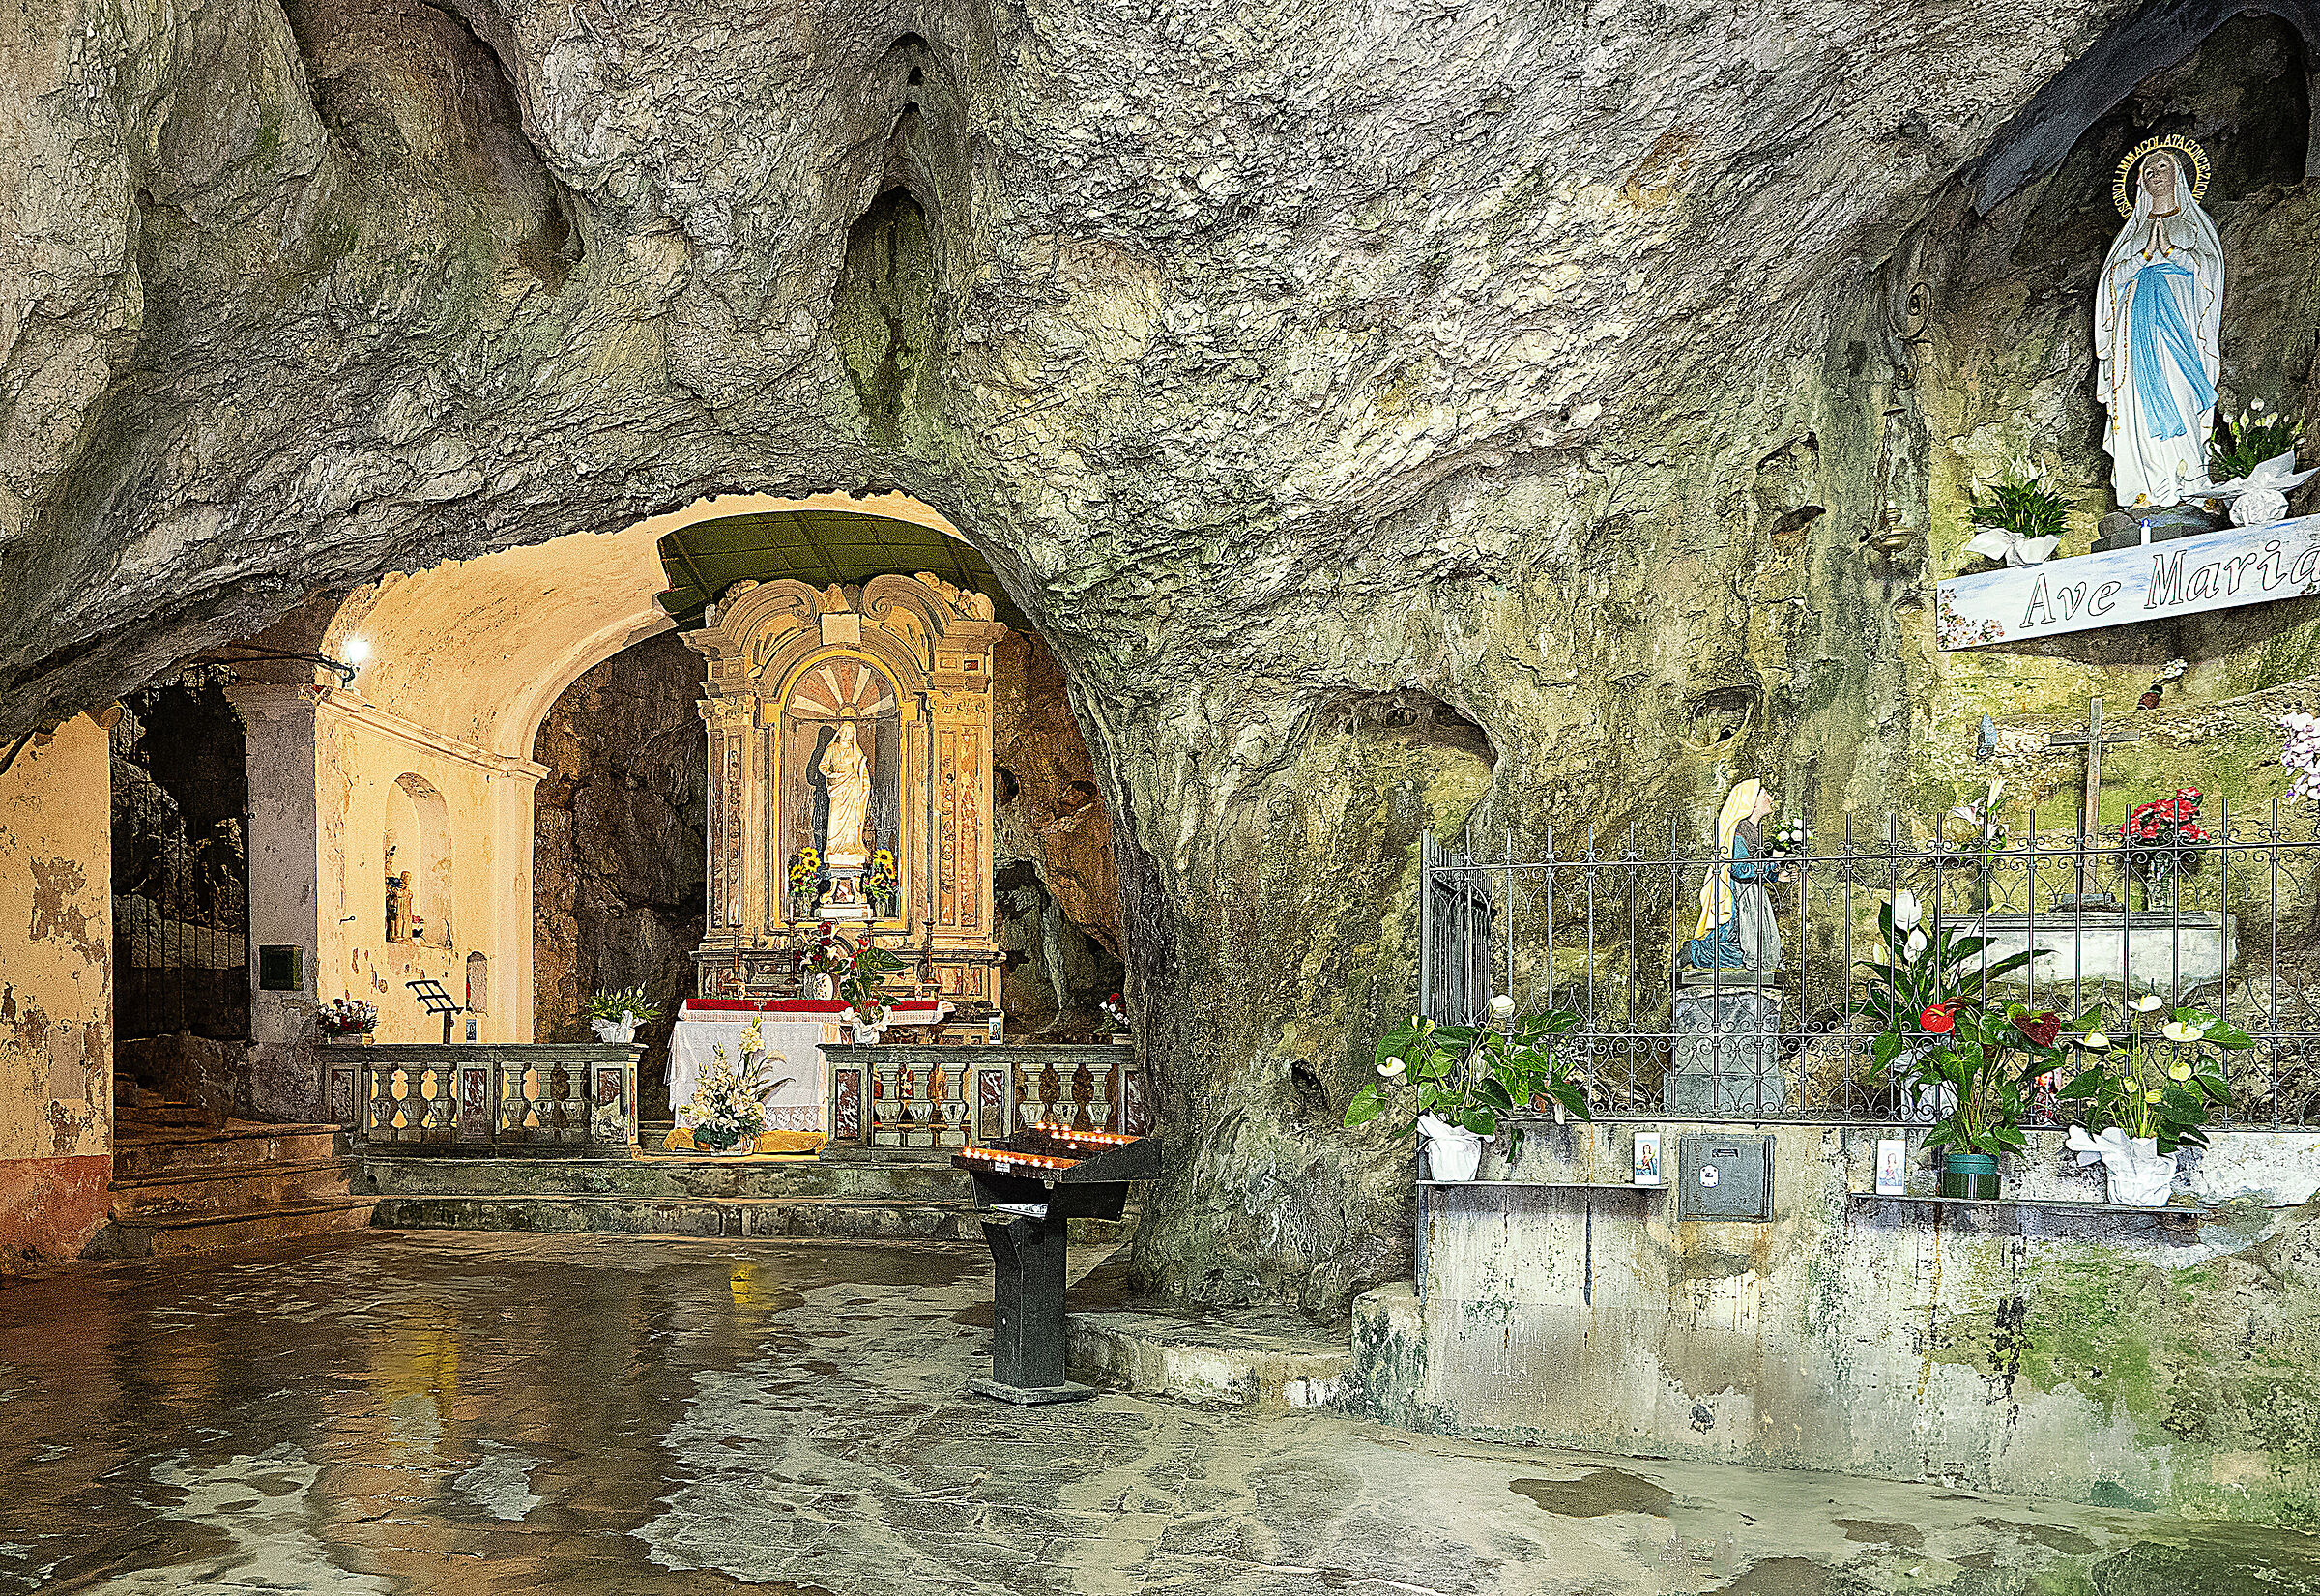 Sanctuary of Santa Lucia - Chapel in the cave...